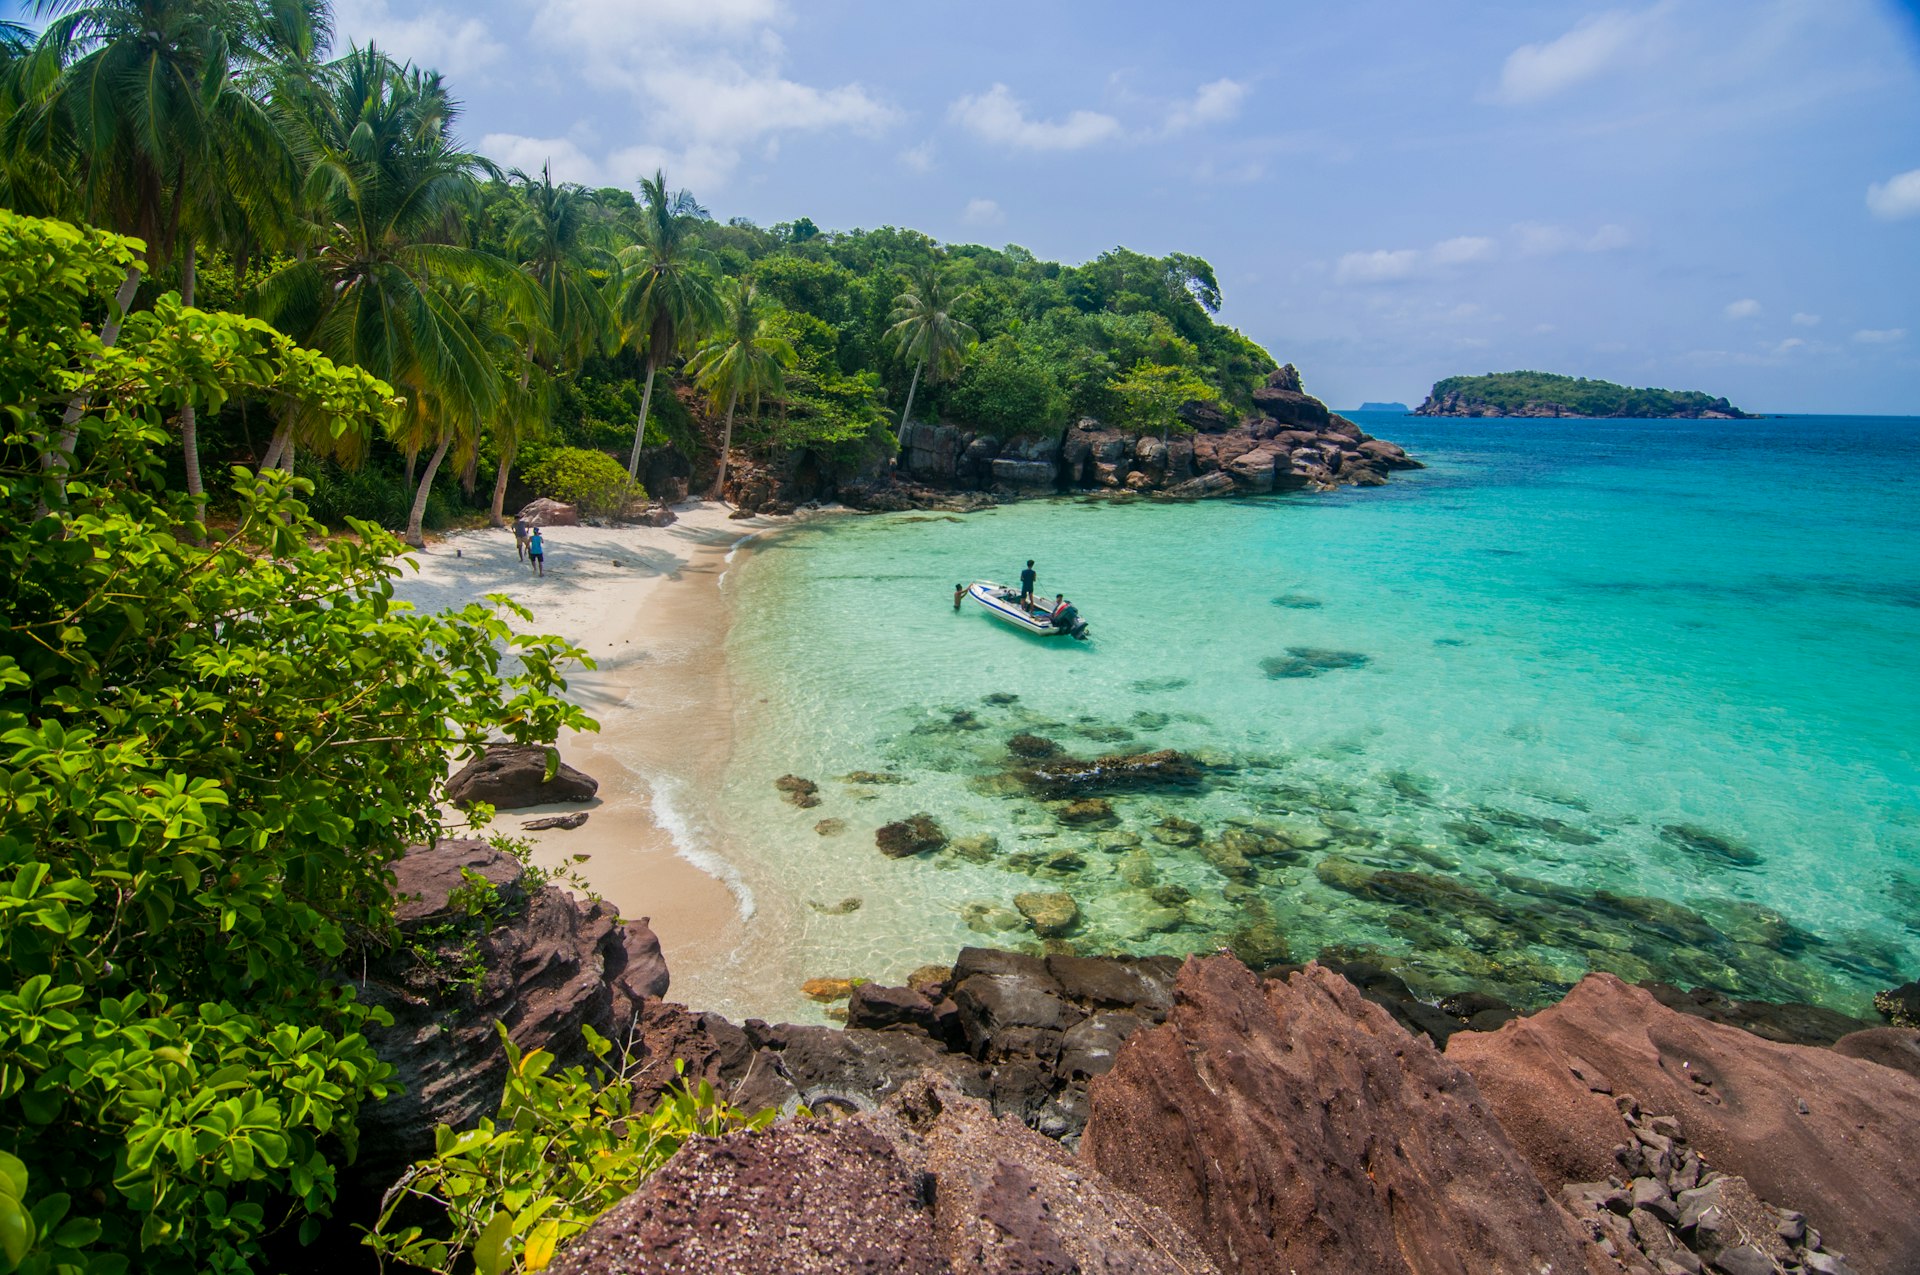 A sandy cove with turquoise ocean backed by lush jungle. A single motorboat is in the bay